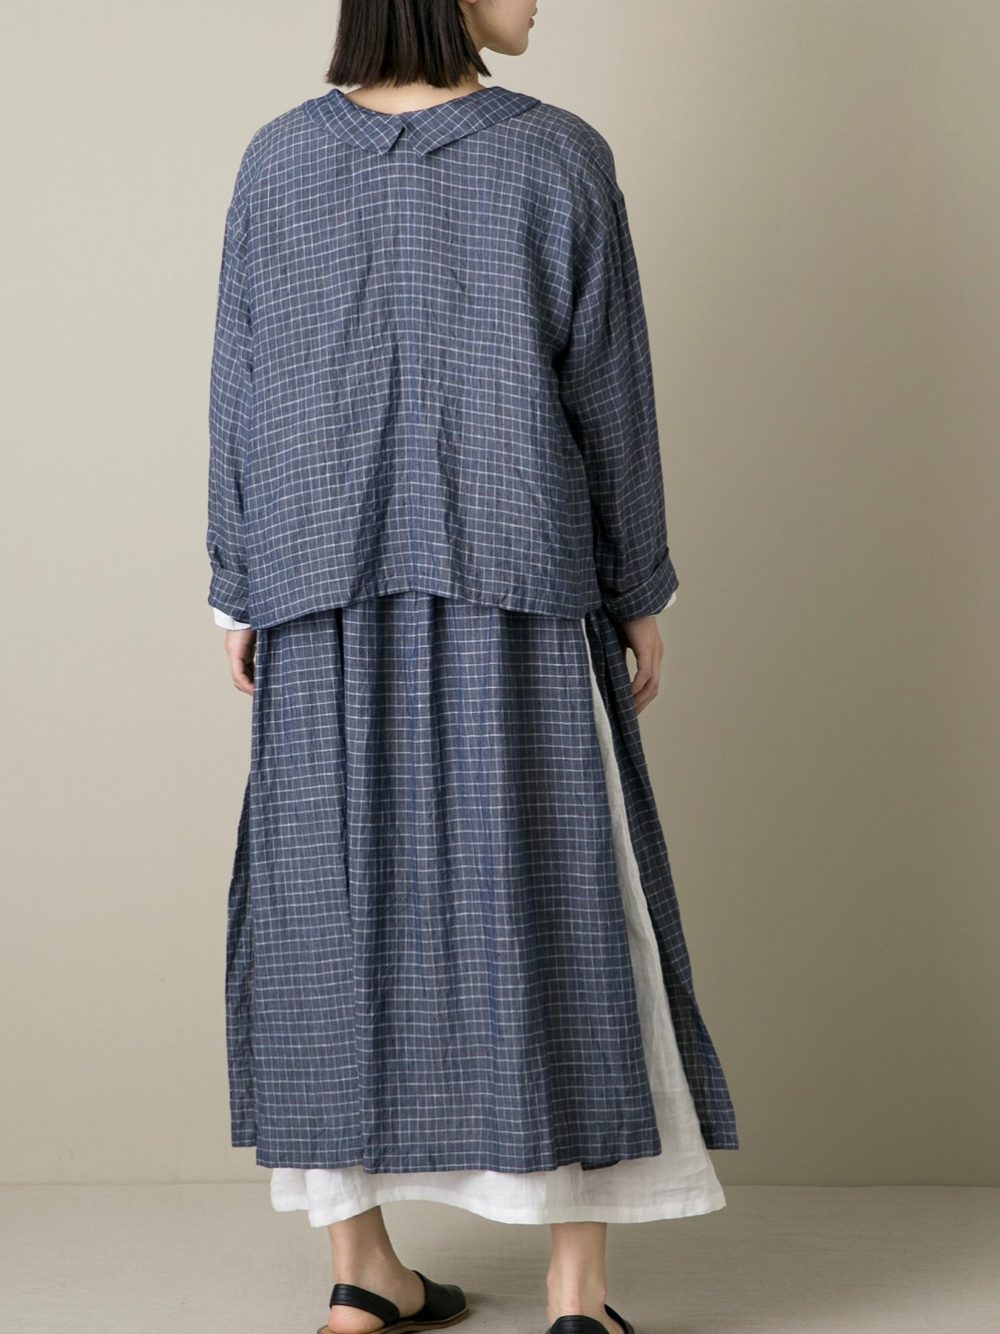 Chambray Linen Check 2Way ブラウス | ITEM | Vlas blomme 